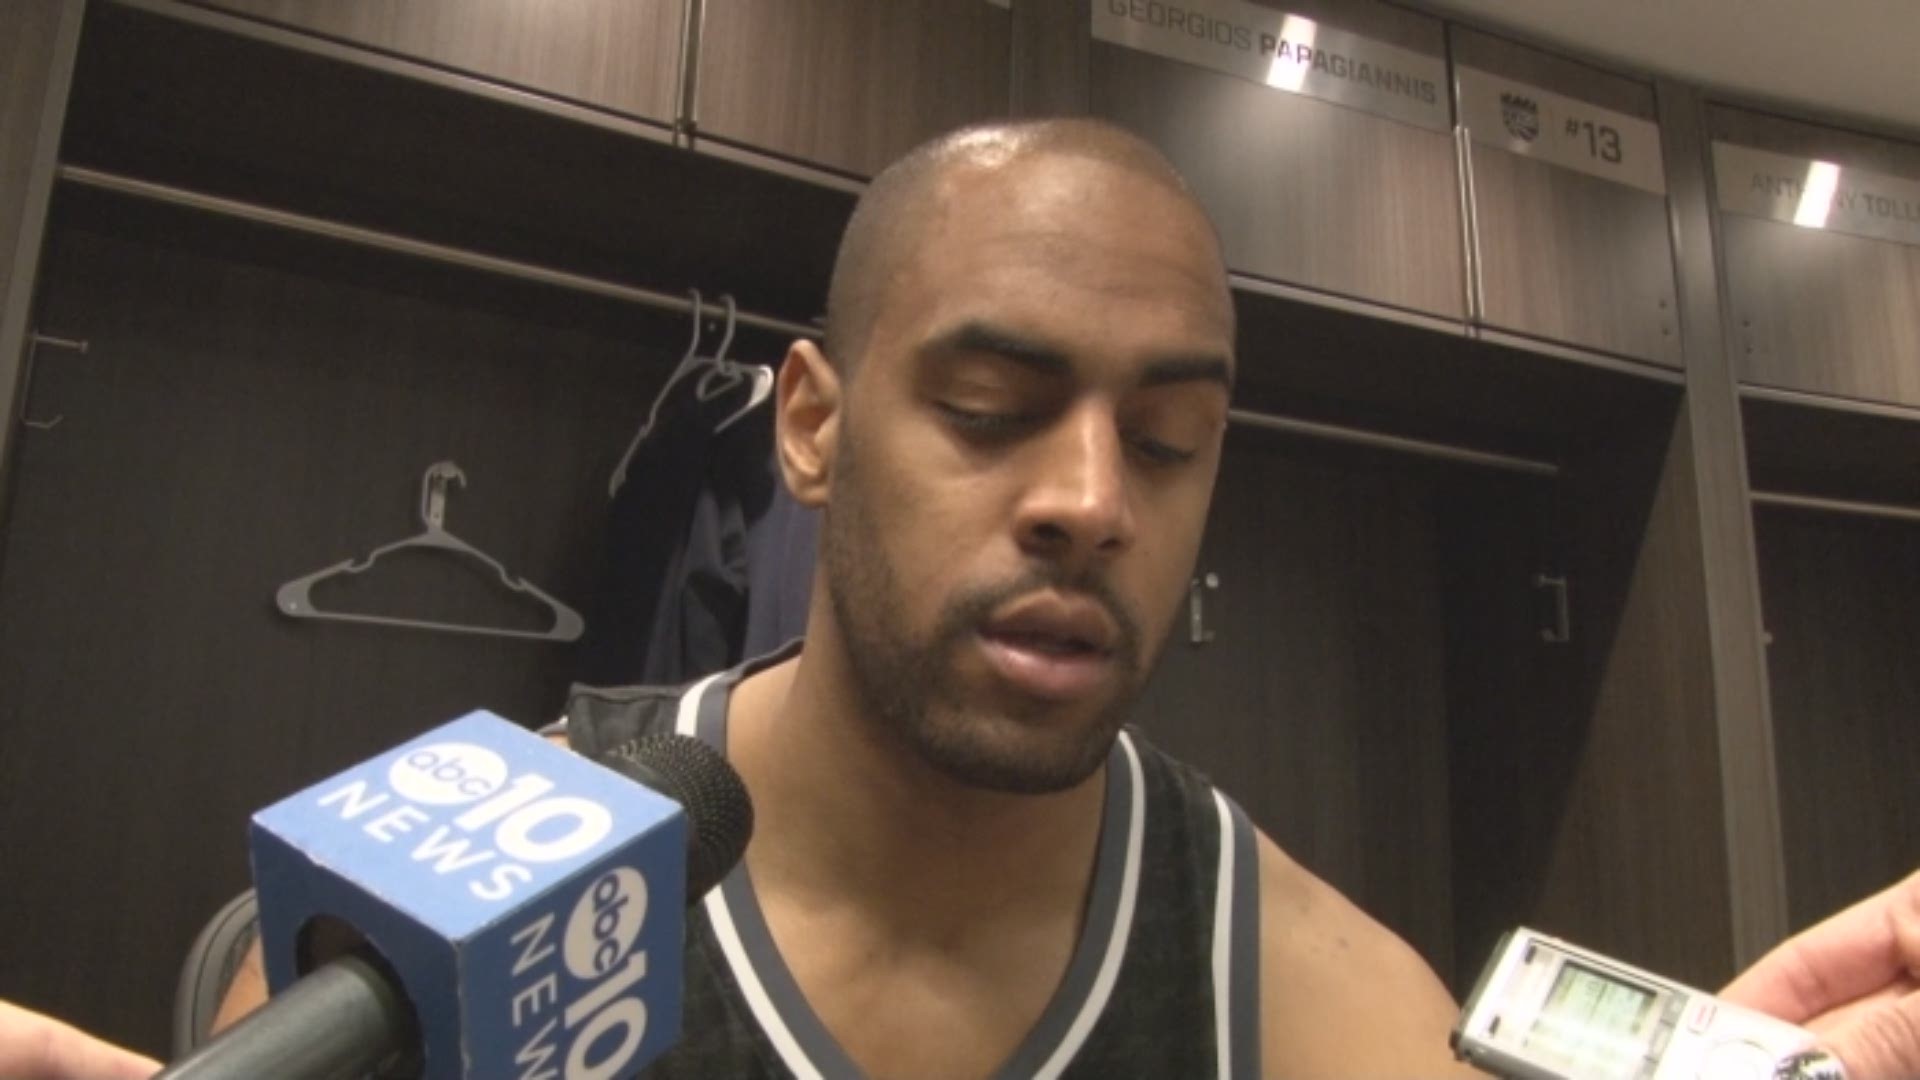 Sacramento Kings guard Arron Afflalo discusses Rudy Gay's likely season-ending injury and the team's 1-6 homestand following Wednesday's defeat to the Indiana Pacers.